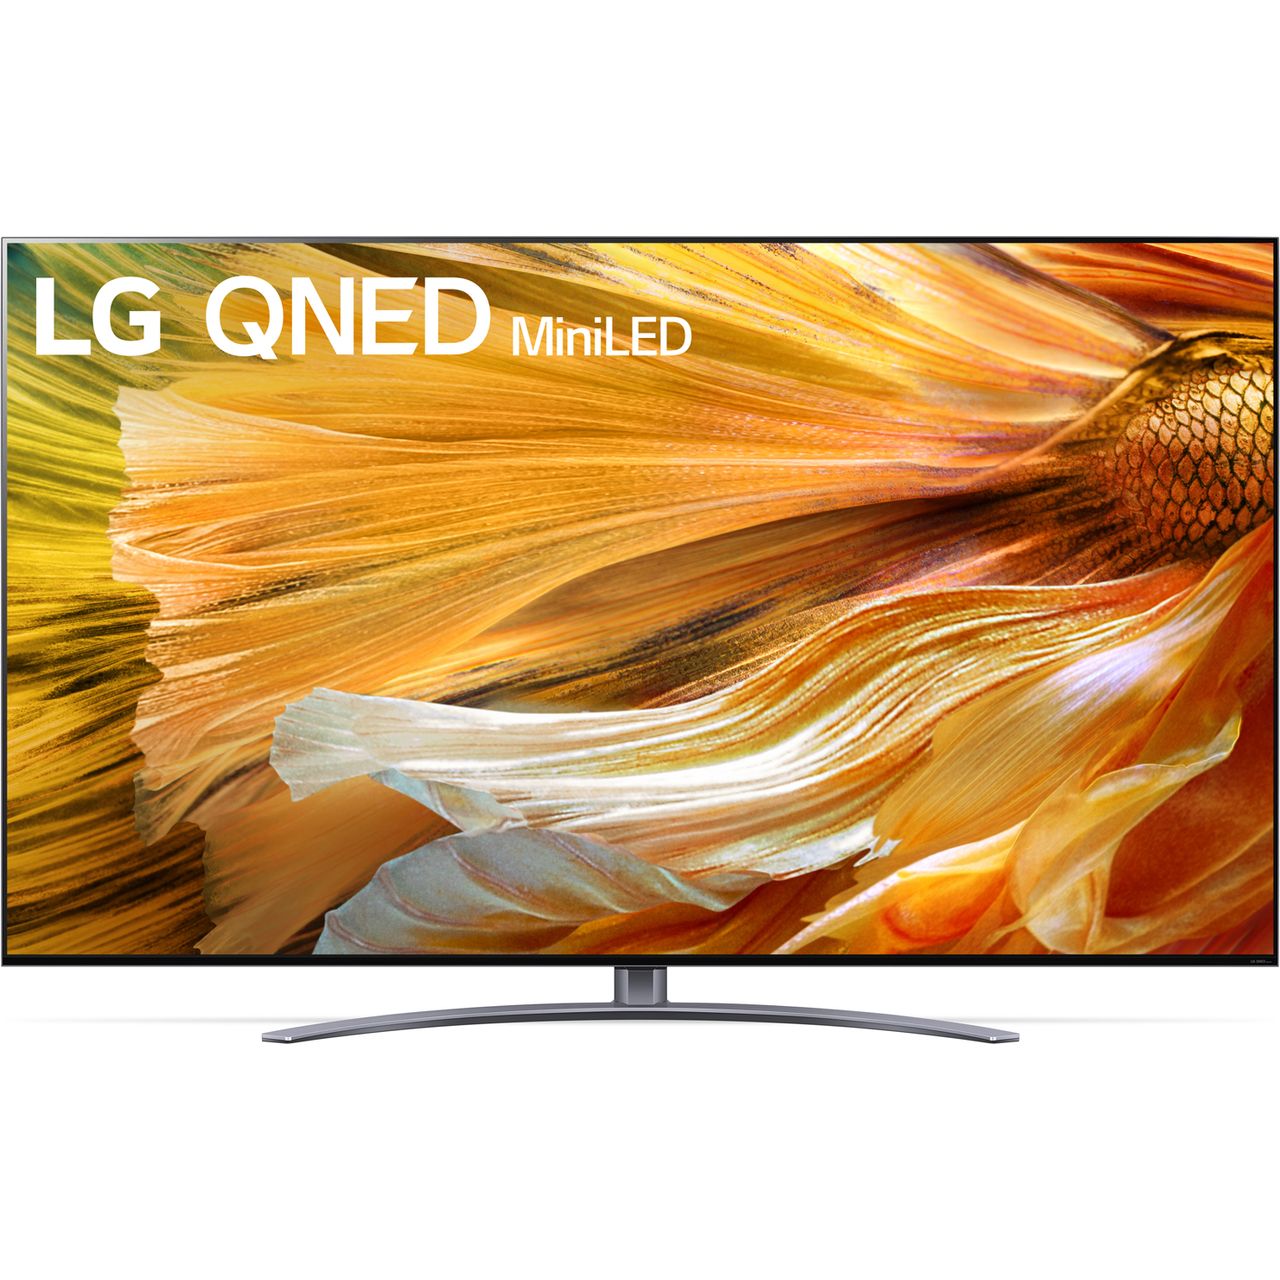 LG QNED91-Serie 65QNED919PA Fernseher - Schwarz